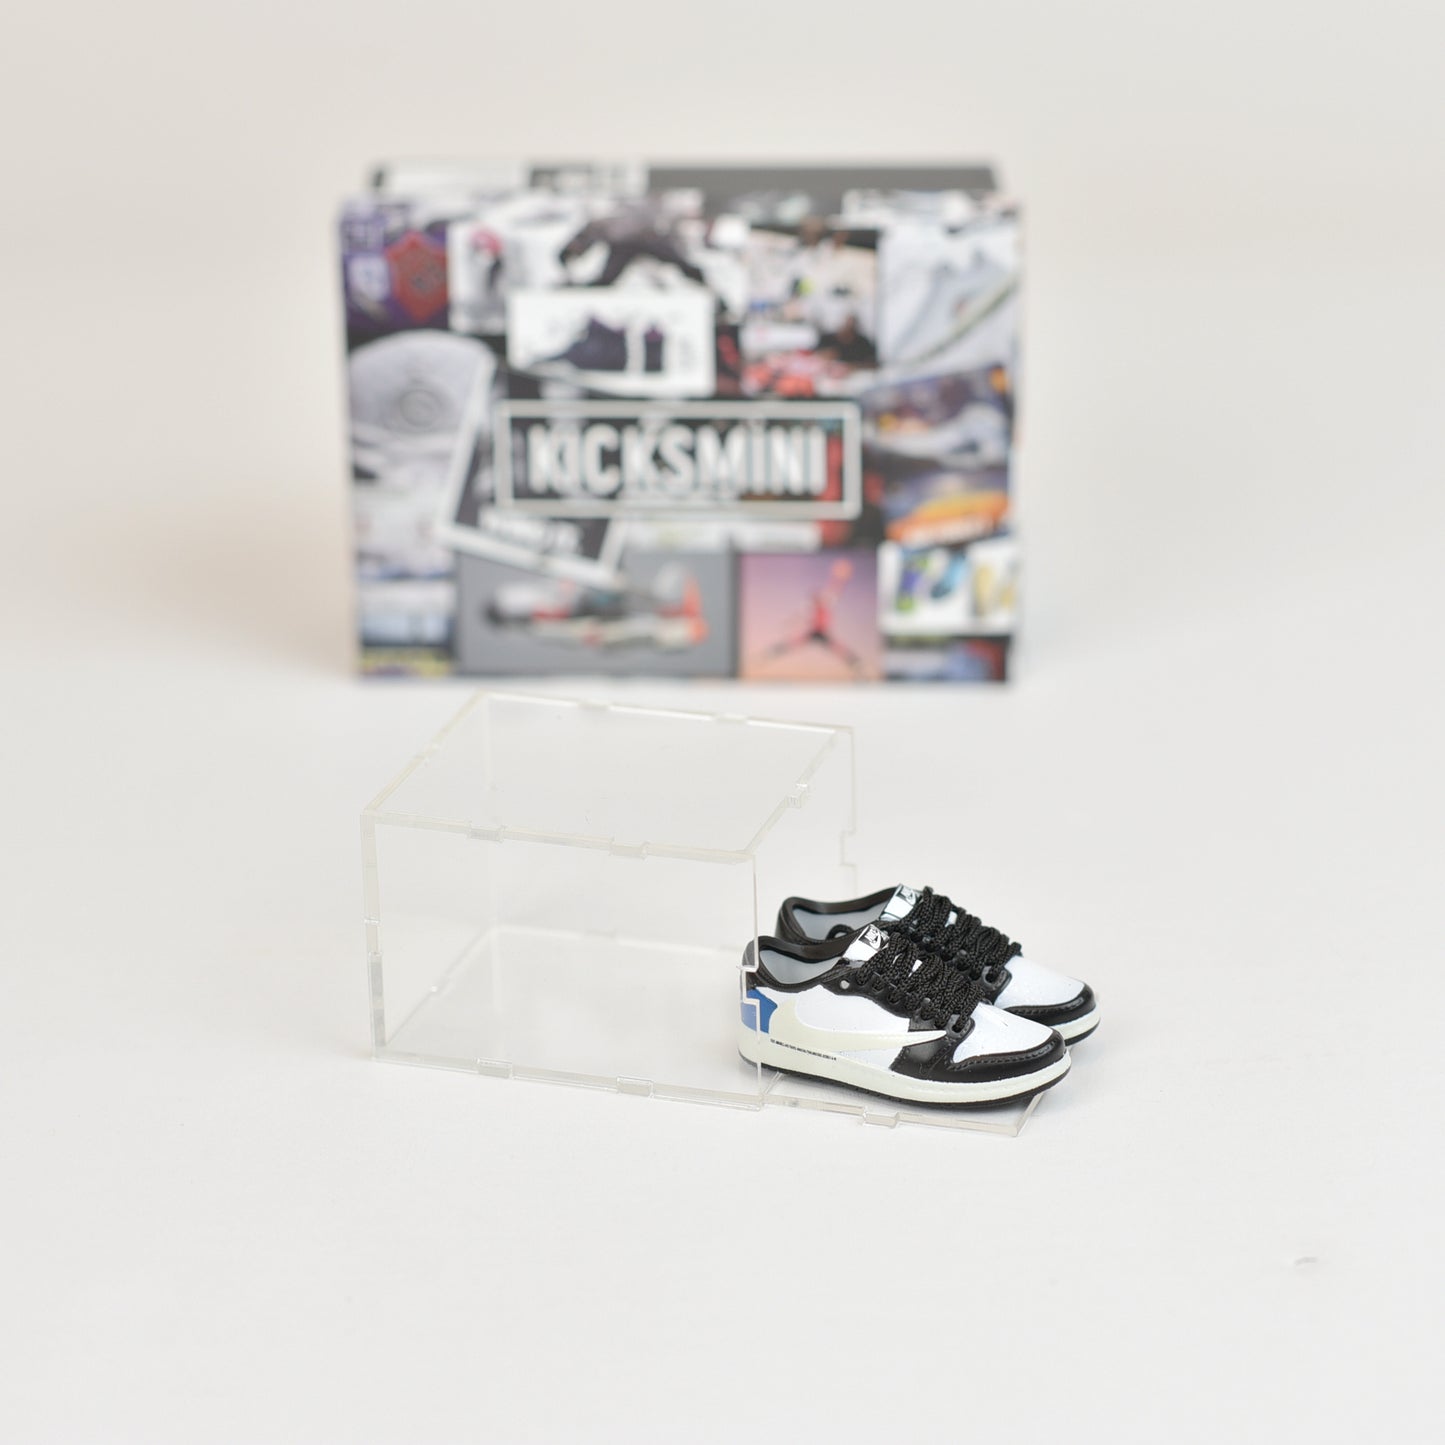 AJ1 Mini Sneakers Collection with Display Case